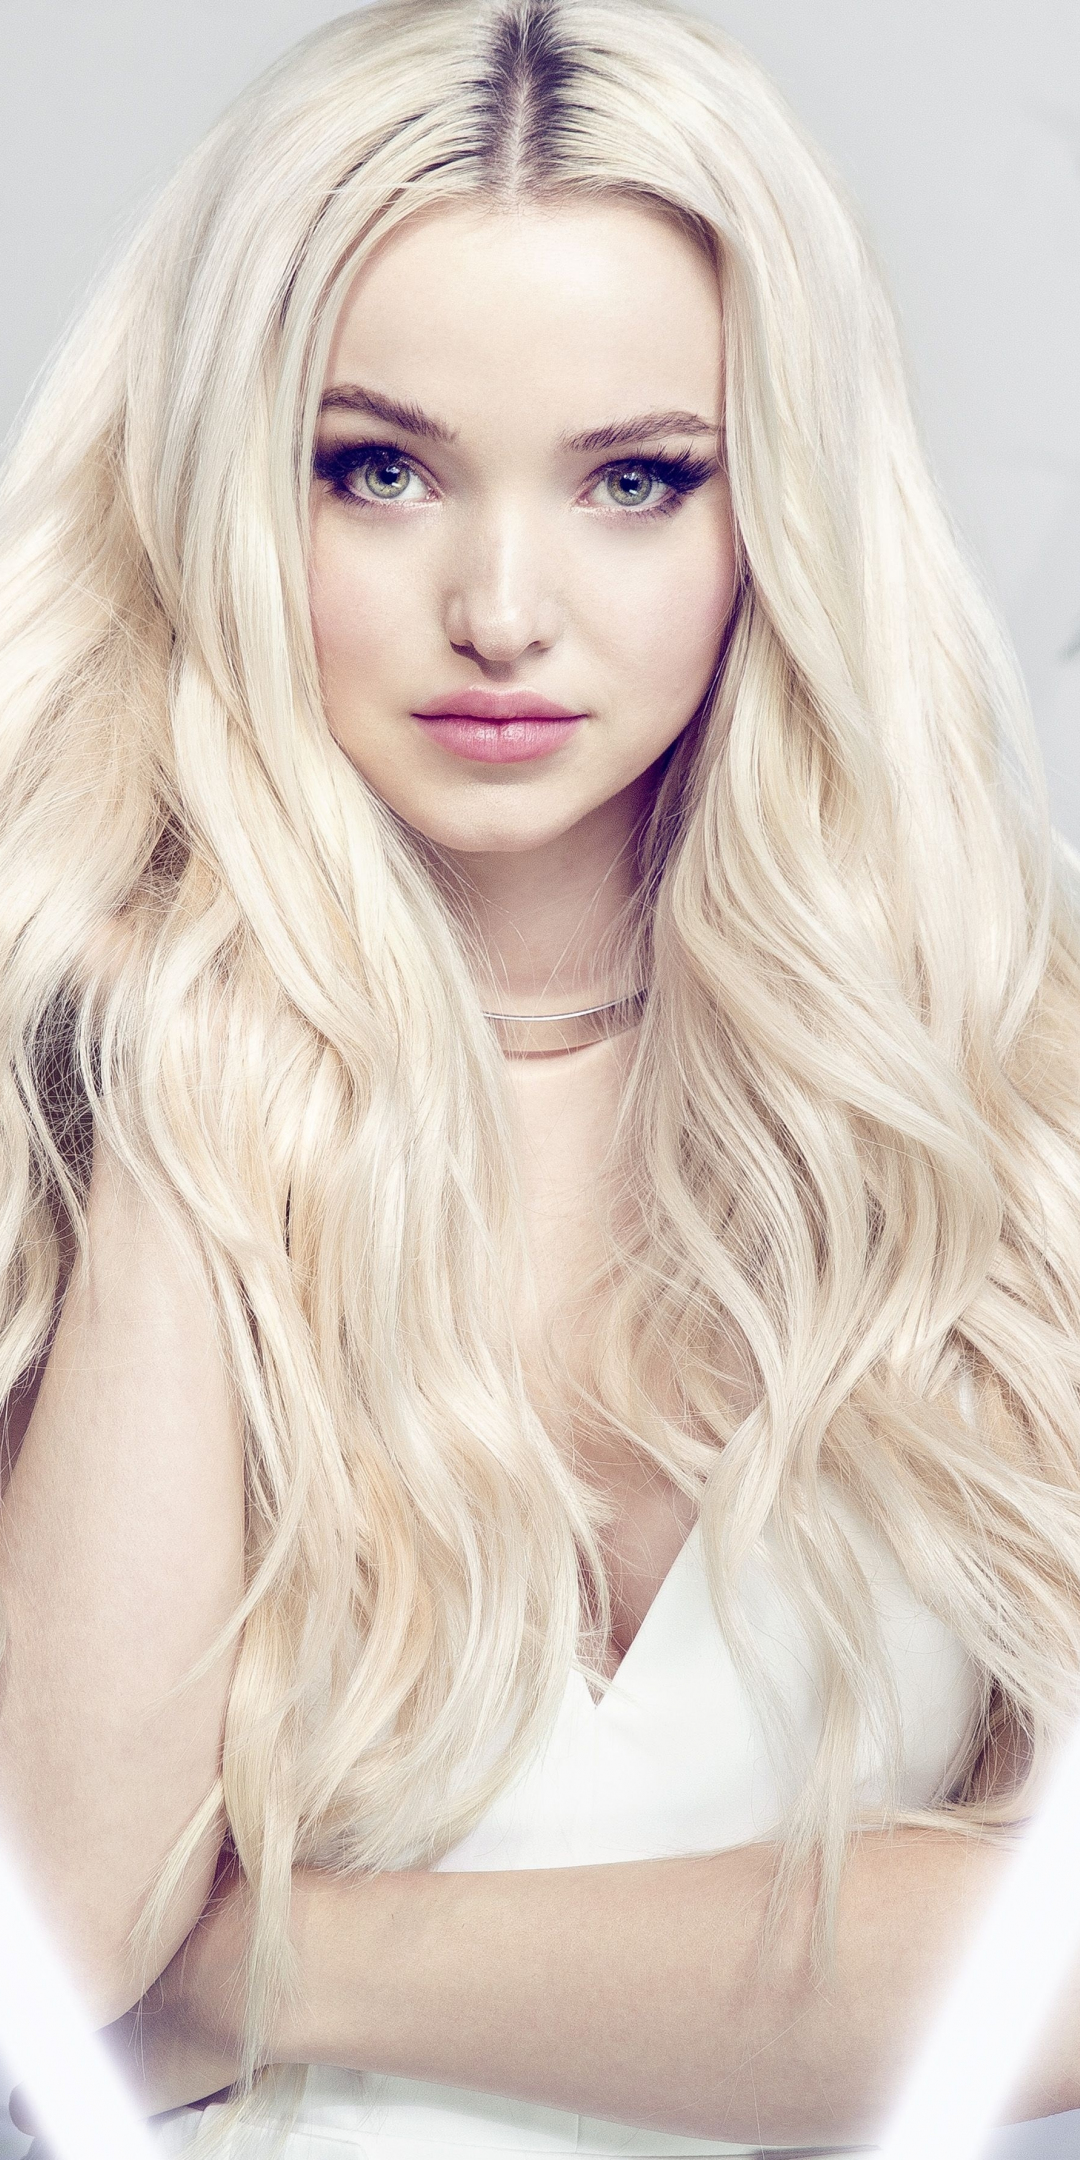 Download Wallpaper 1080x2160 Beautiful And Blonde Actress Dove Cameron Honor 7x Honor 9 Lite